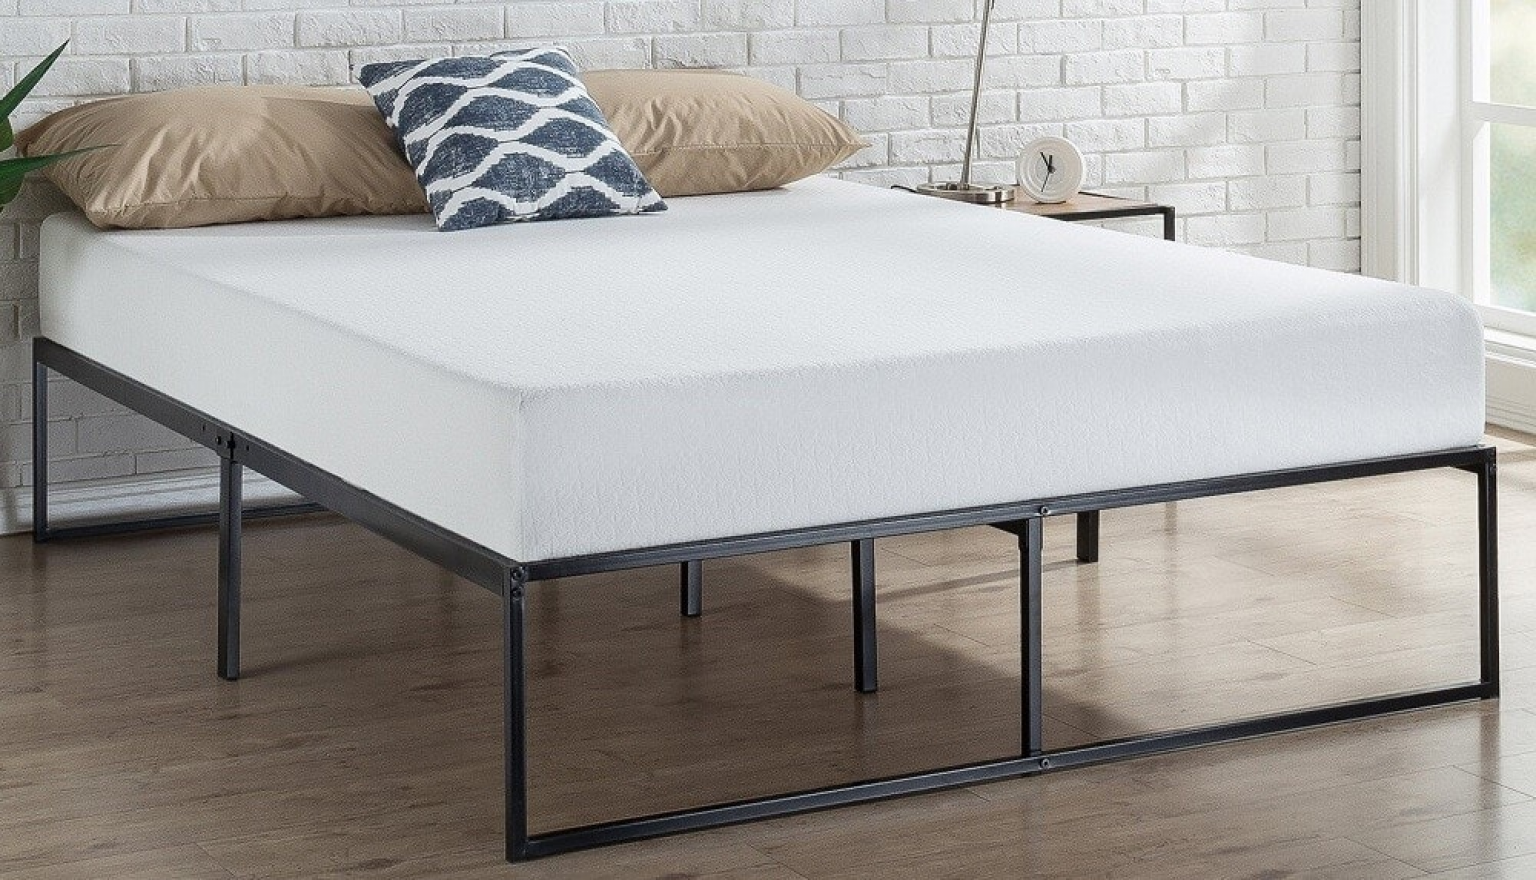 stop a mattress from sliding off box spring